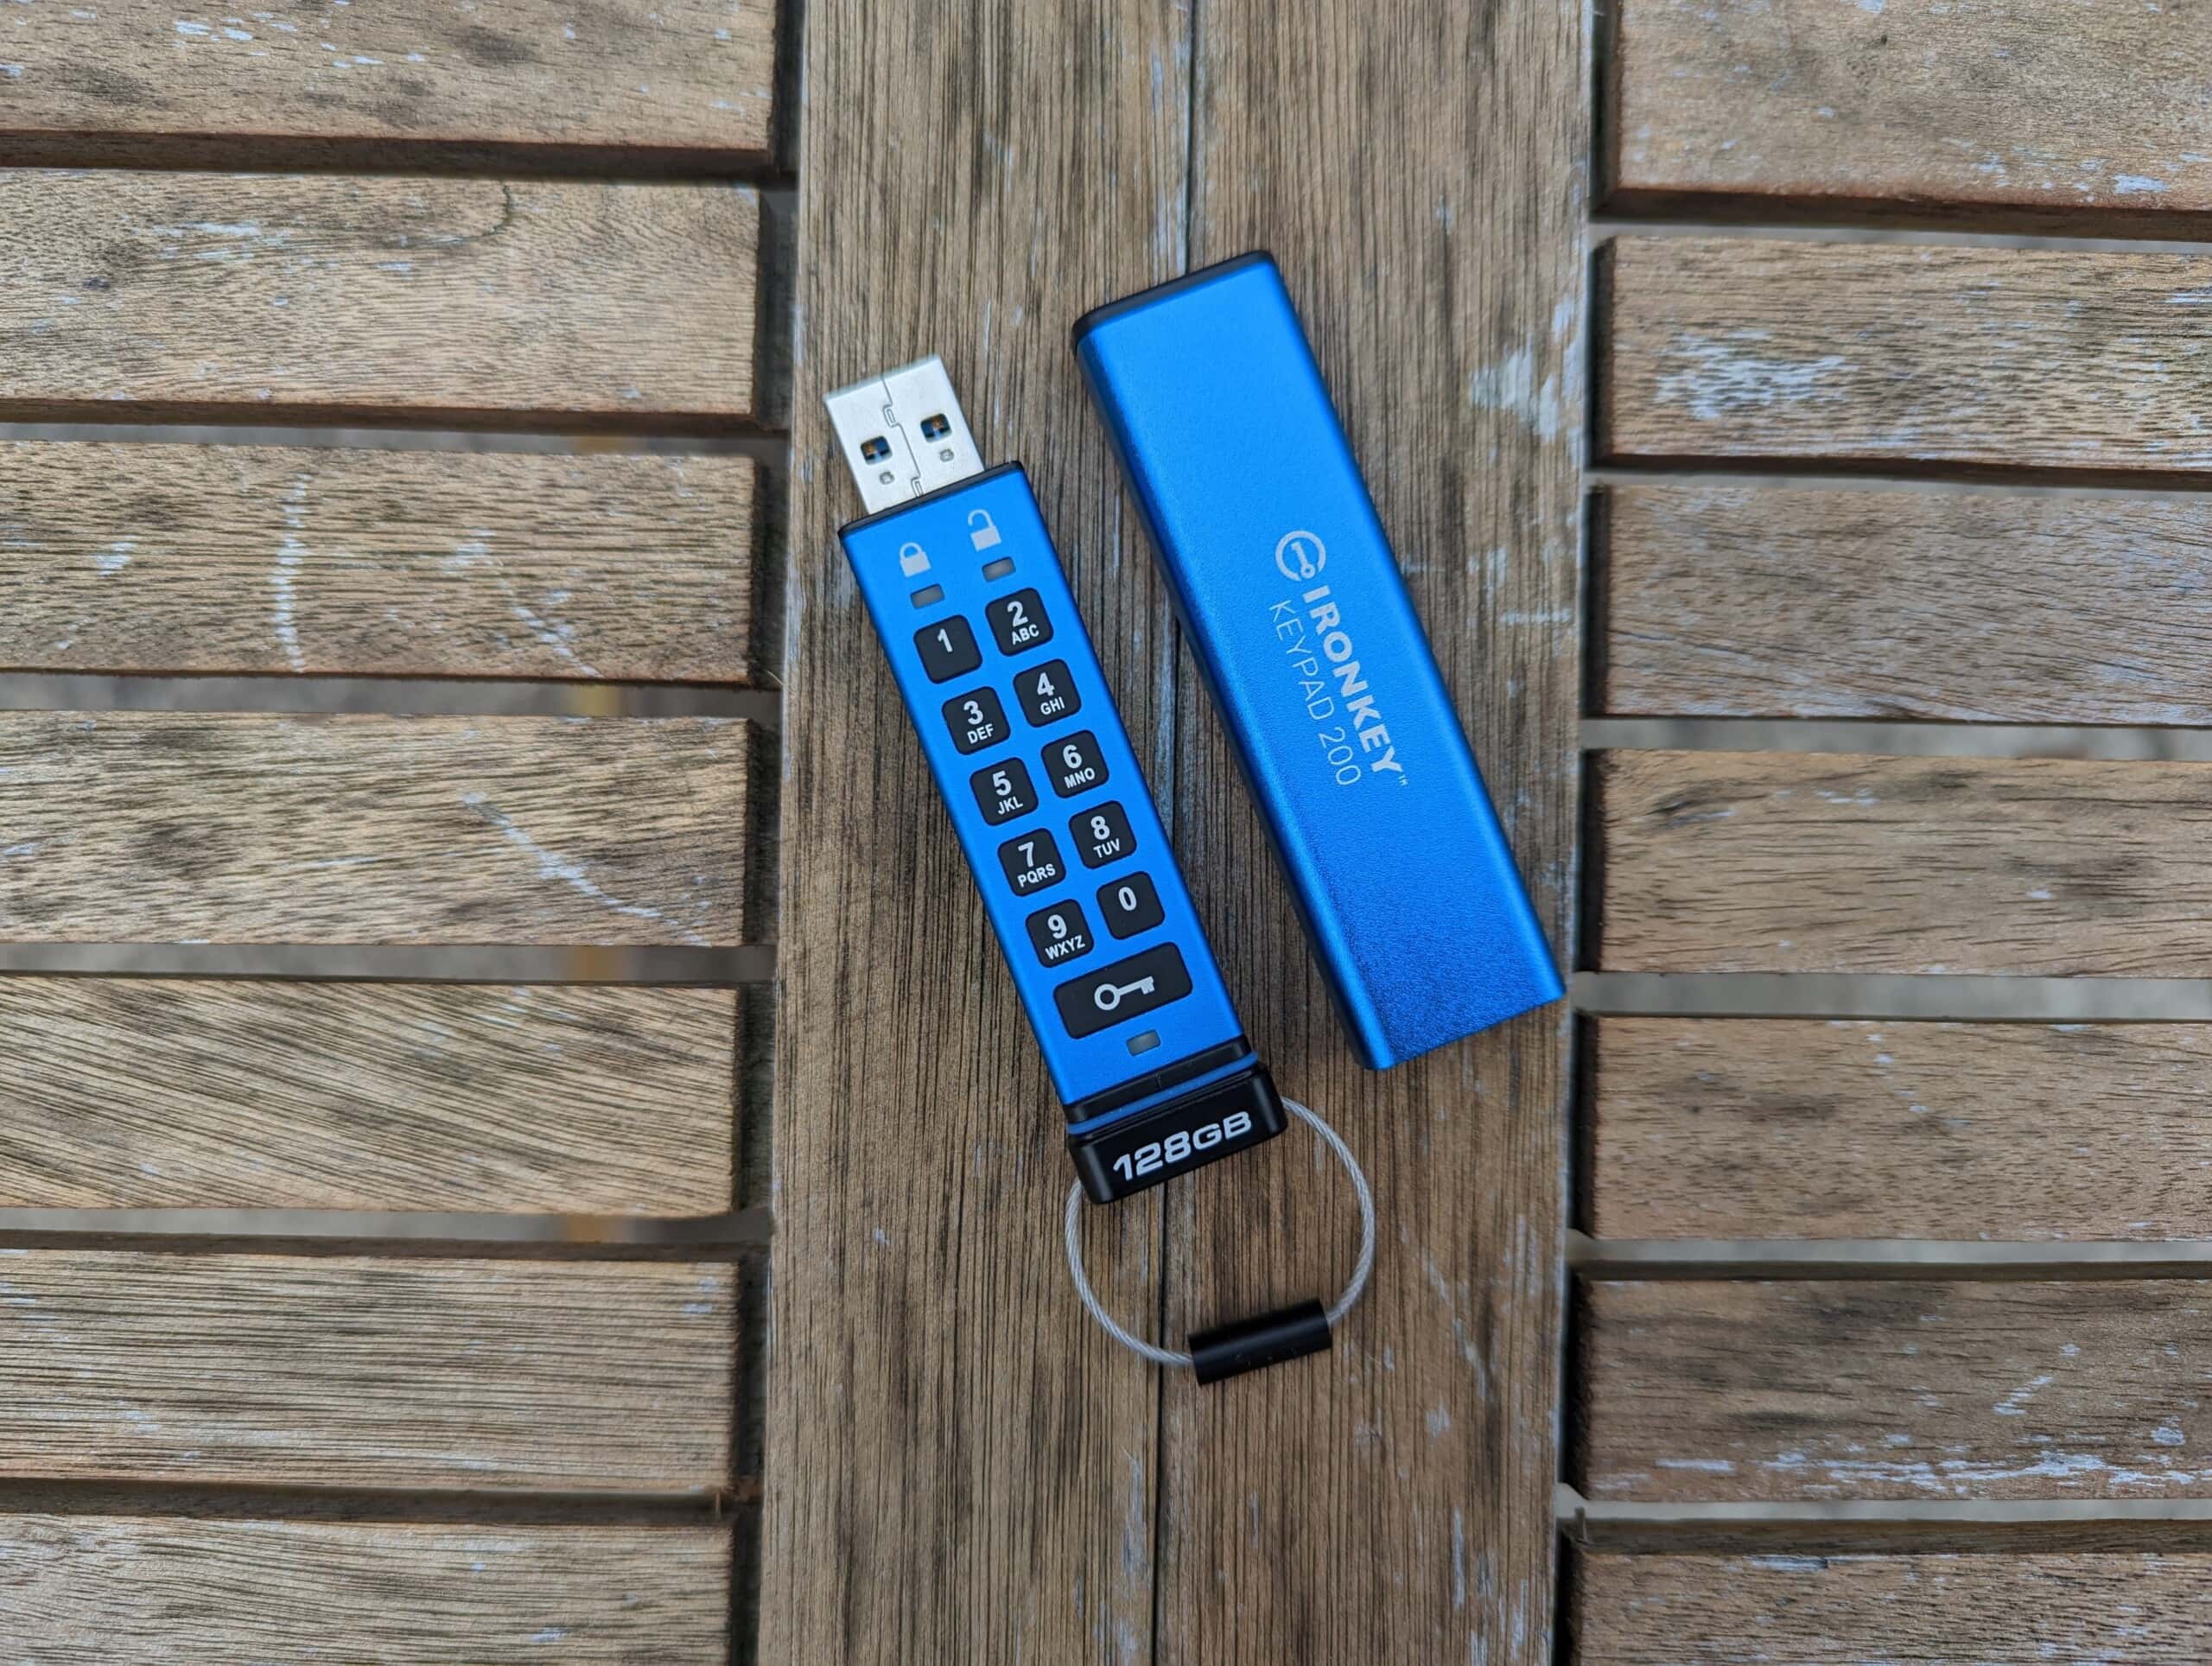 Kingston IronKey Keypad 200 Review1 scaled - Kingston IronKey Keypad 200 Encrypted USB Flash Drive Review – A secure drive with FIPS 140-3 Level 3 military-grade security - Now with USB-C